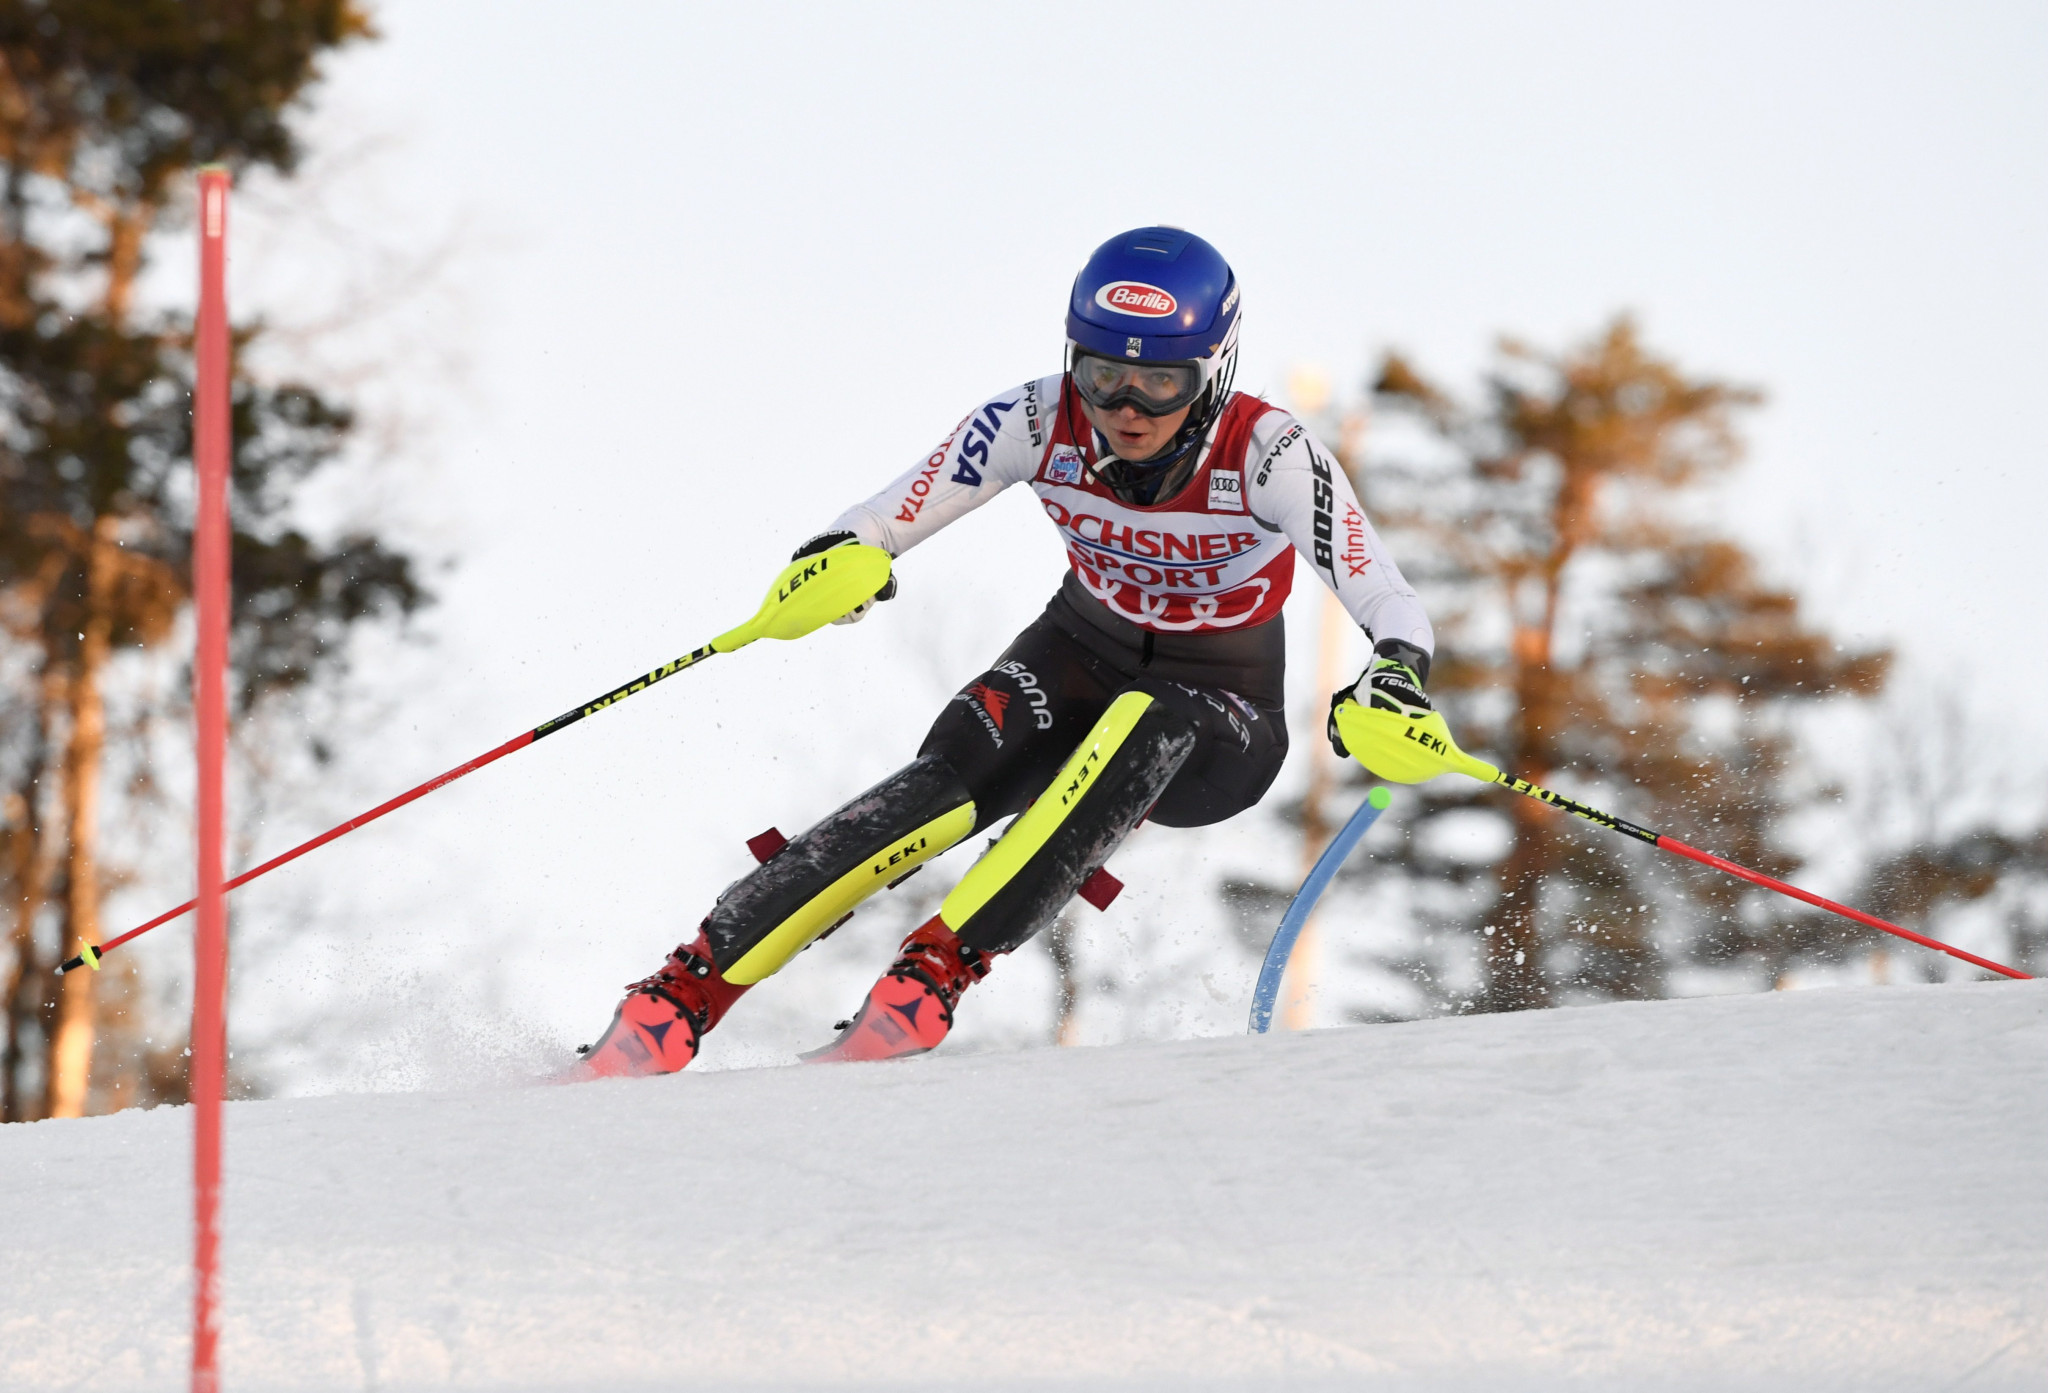 Mikaela Shiffrin won after the quickest first run in Levi ©Getty Images